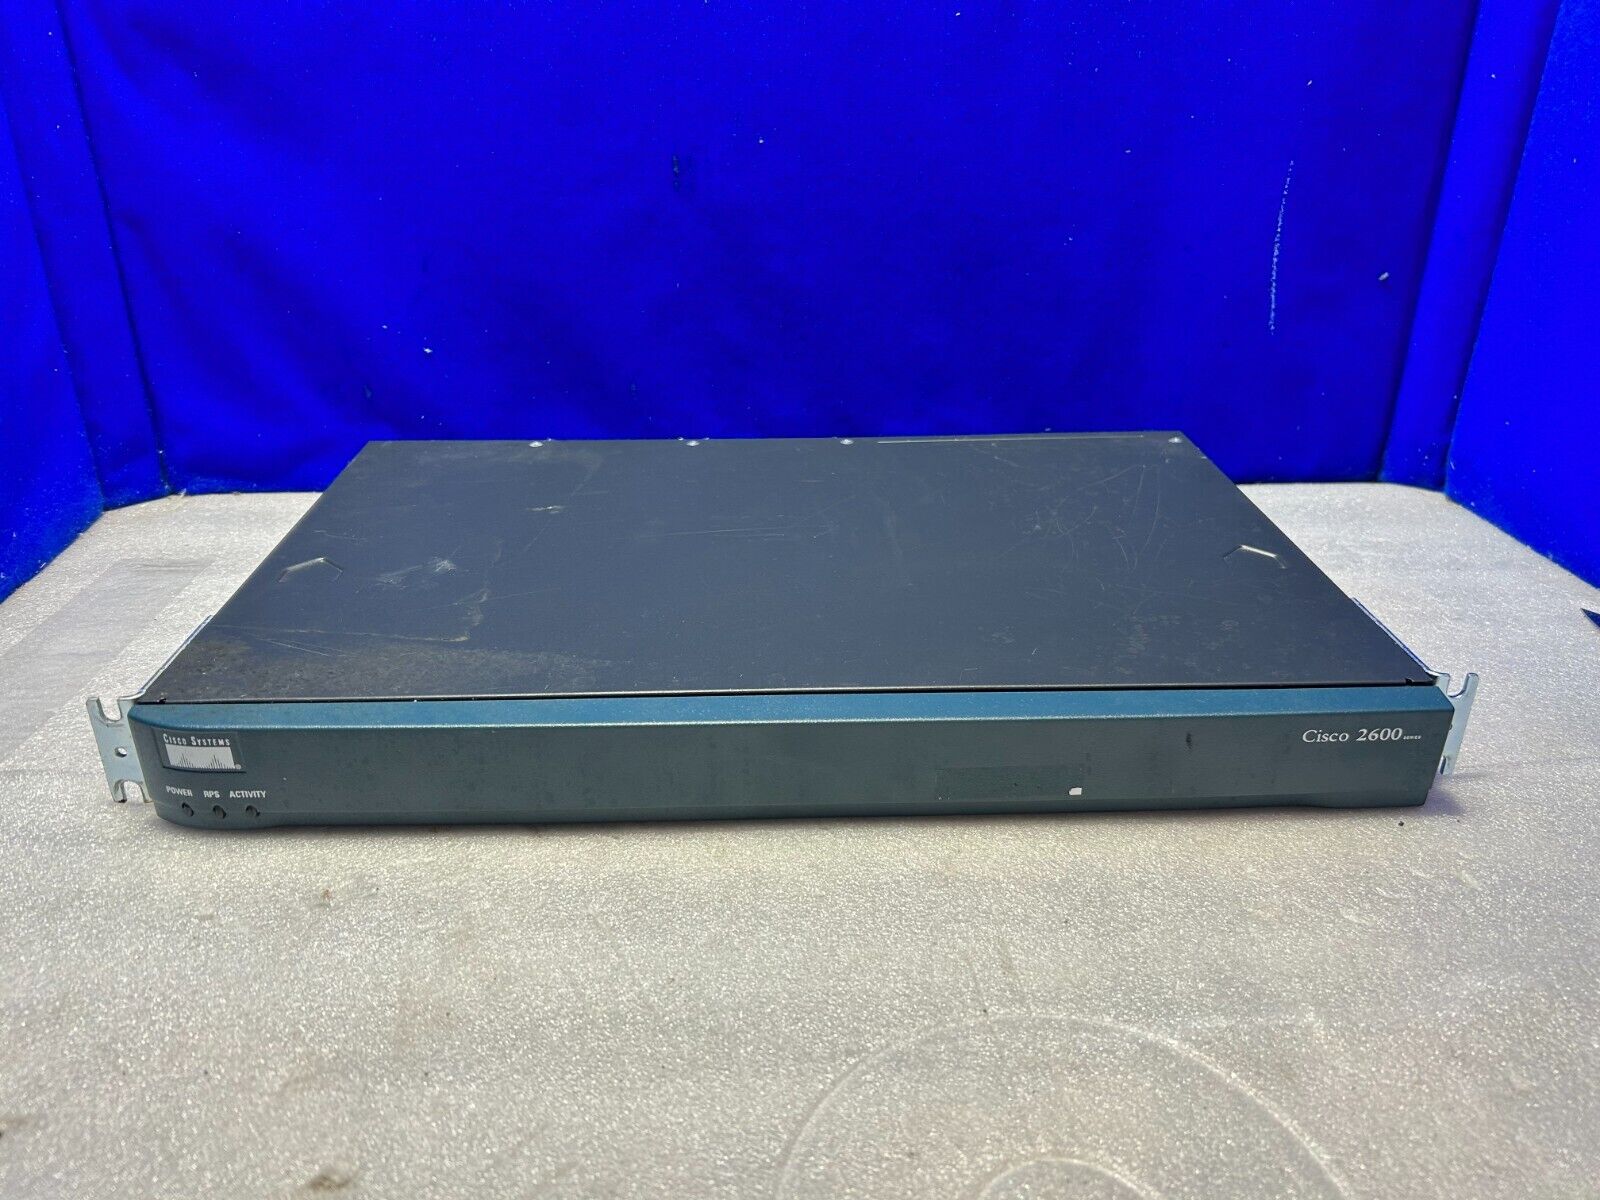 Cisco 2600 2620XM Series Modular Access Router - PLEASE CHECK PICTURES - AS IS